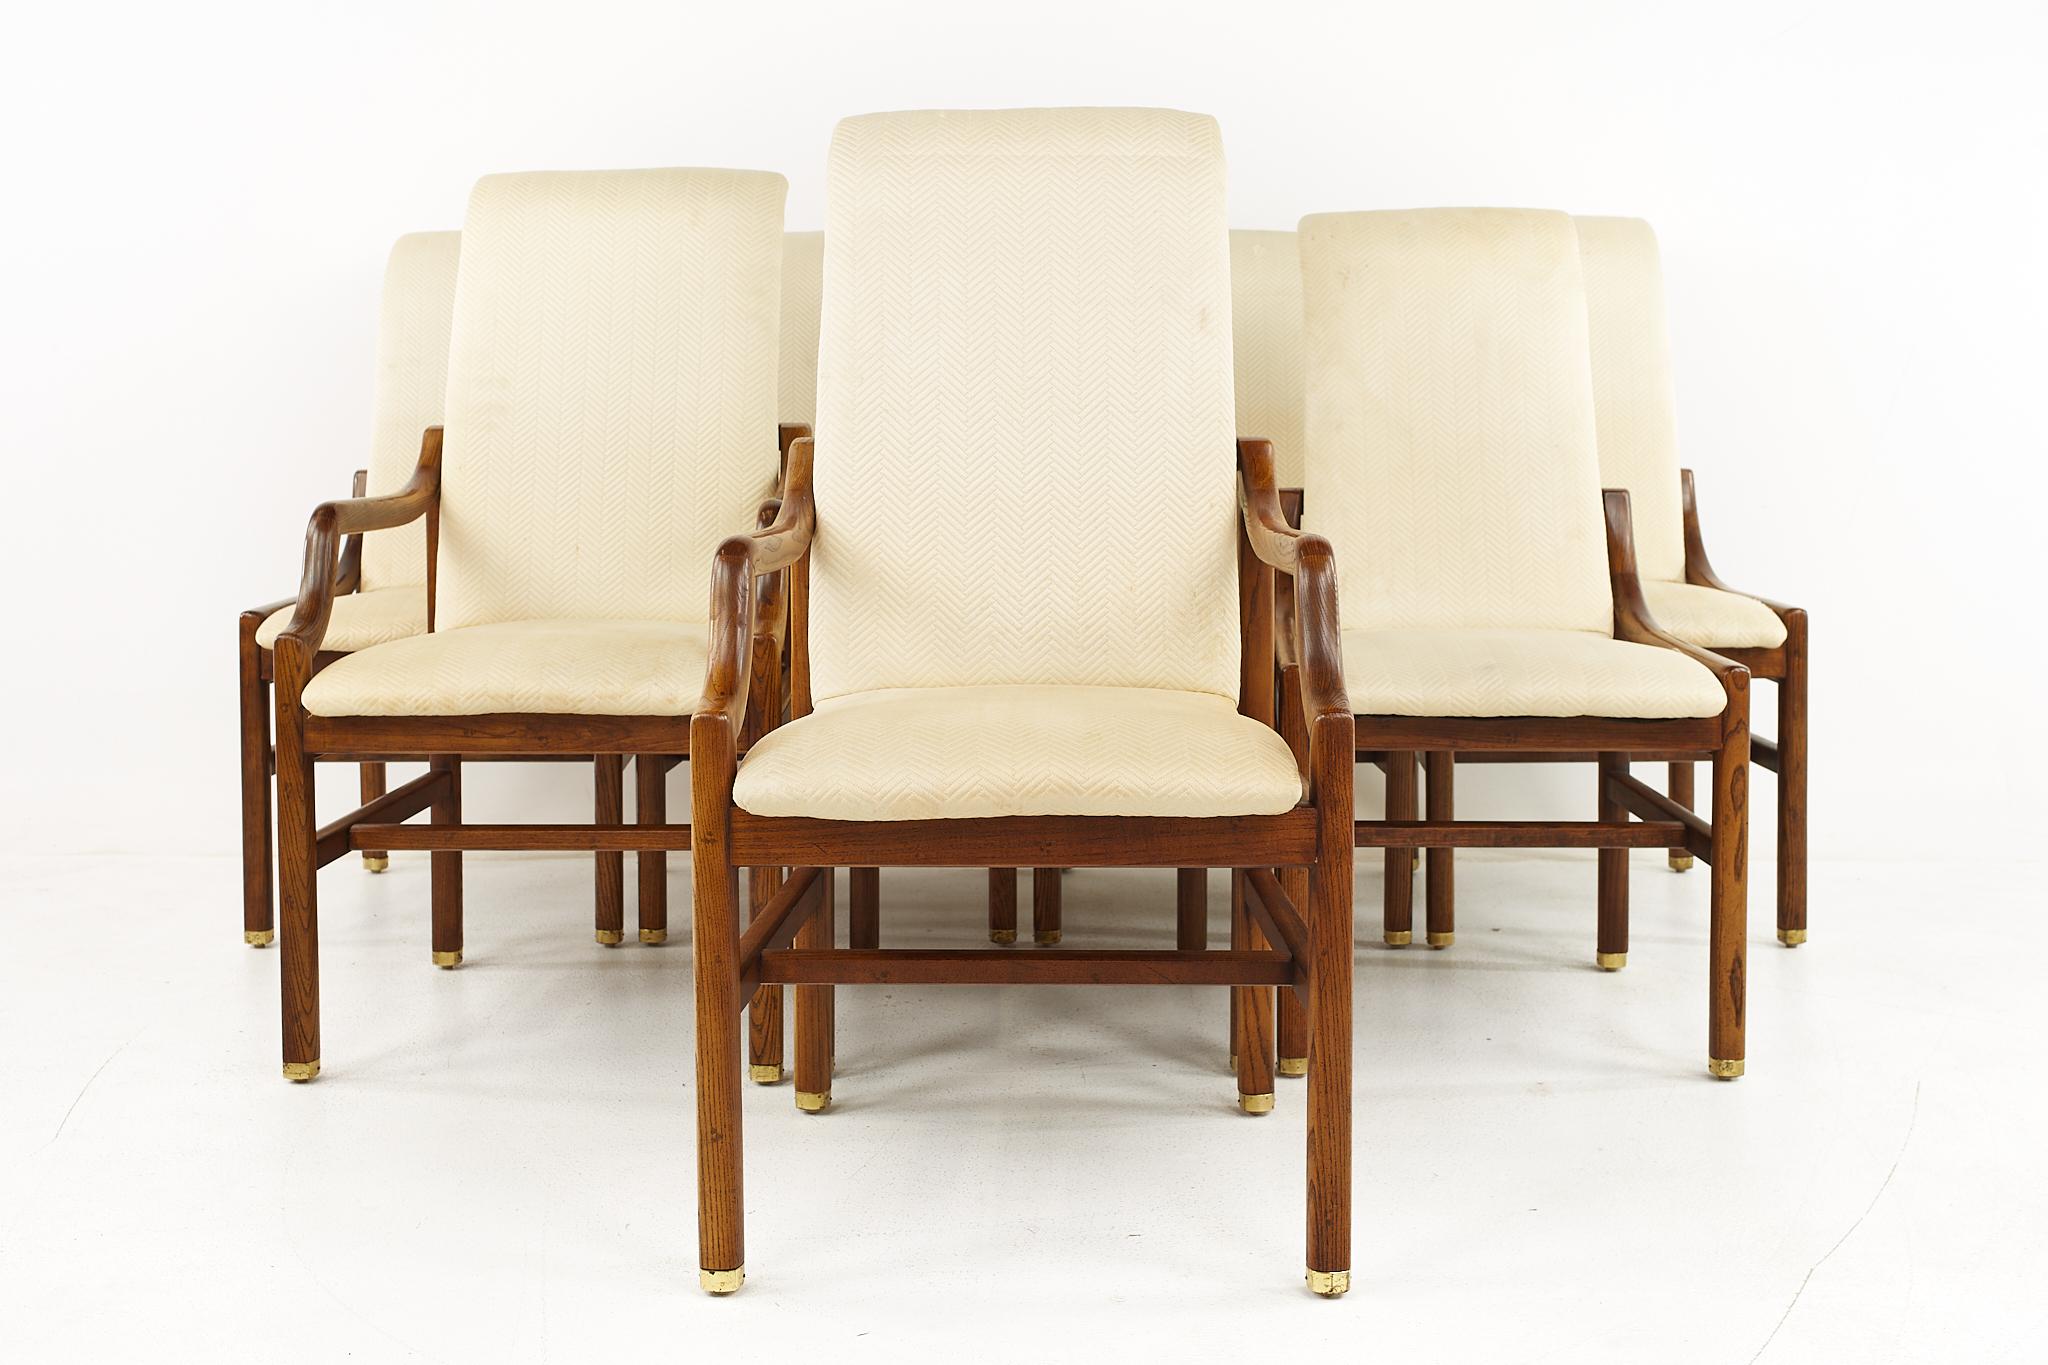 Henredon mid century oak and brass dining chairs - Set of 8

The captains' chair measures: 22 wide x 22 deep x 42 high, with a seat height of 18 and arm height of 25.25 inches
The side chairs measure: 20.5 wide x 22 deep x 41 high, with a seat